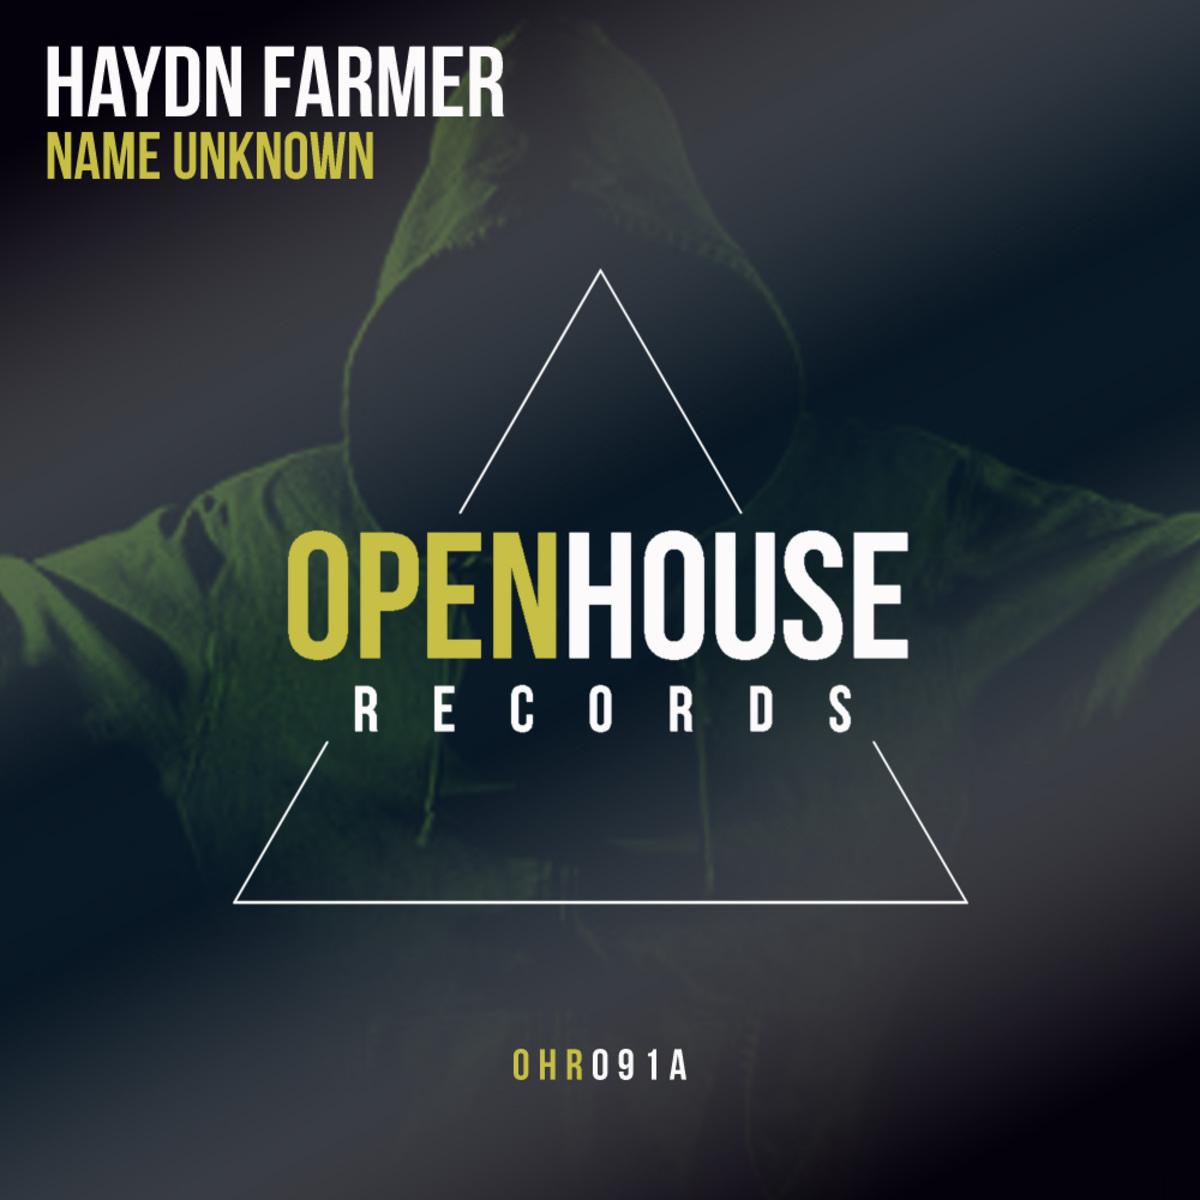 Haydn Farmer - Name Unknown / Open House Records